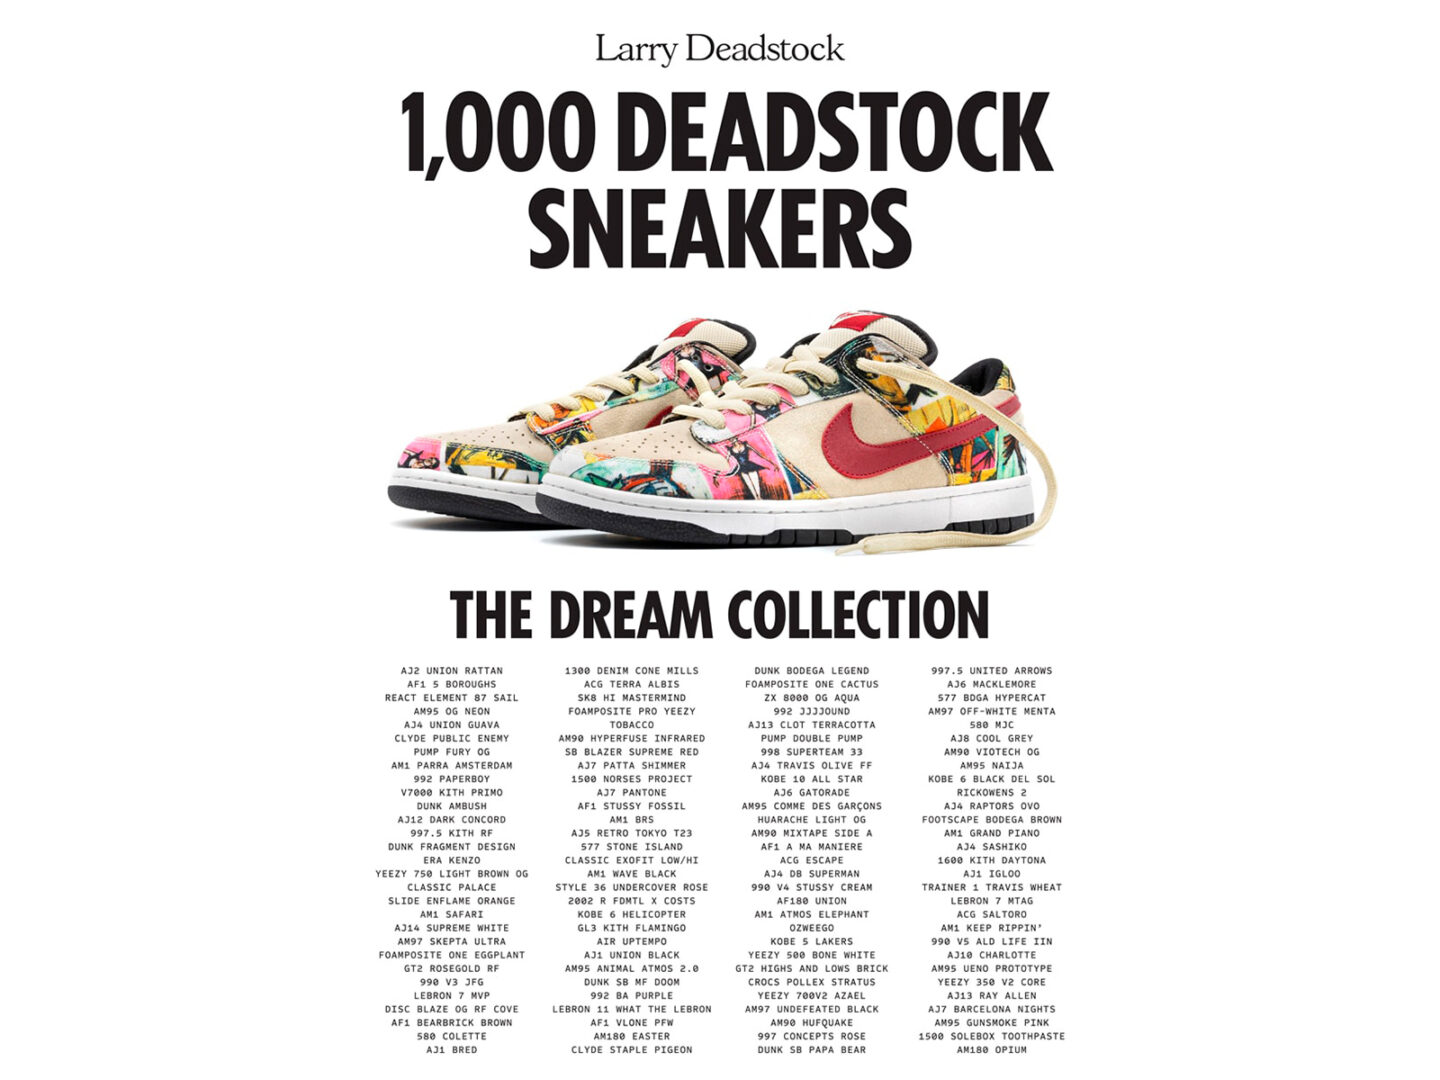 This book collects the most iconic sneakers in history